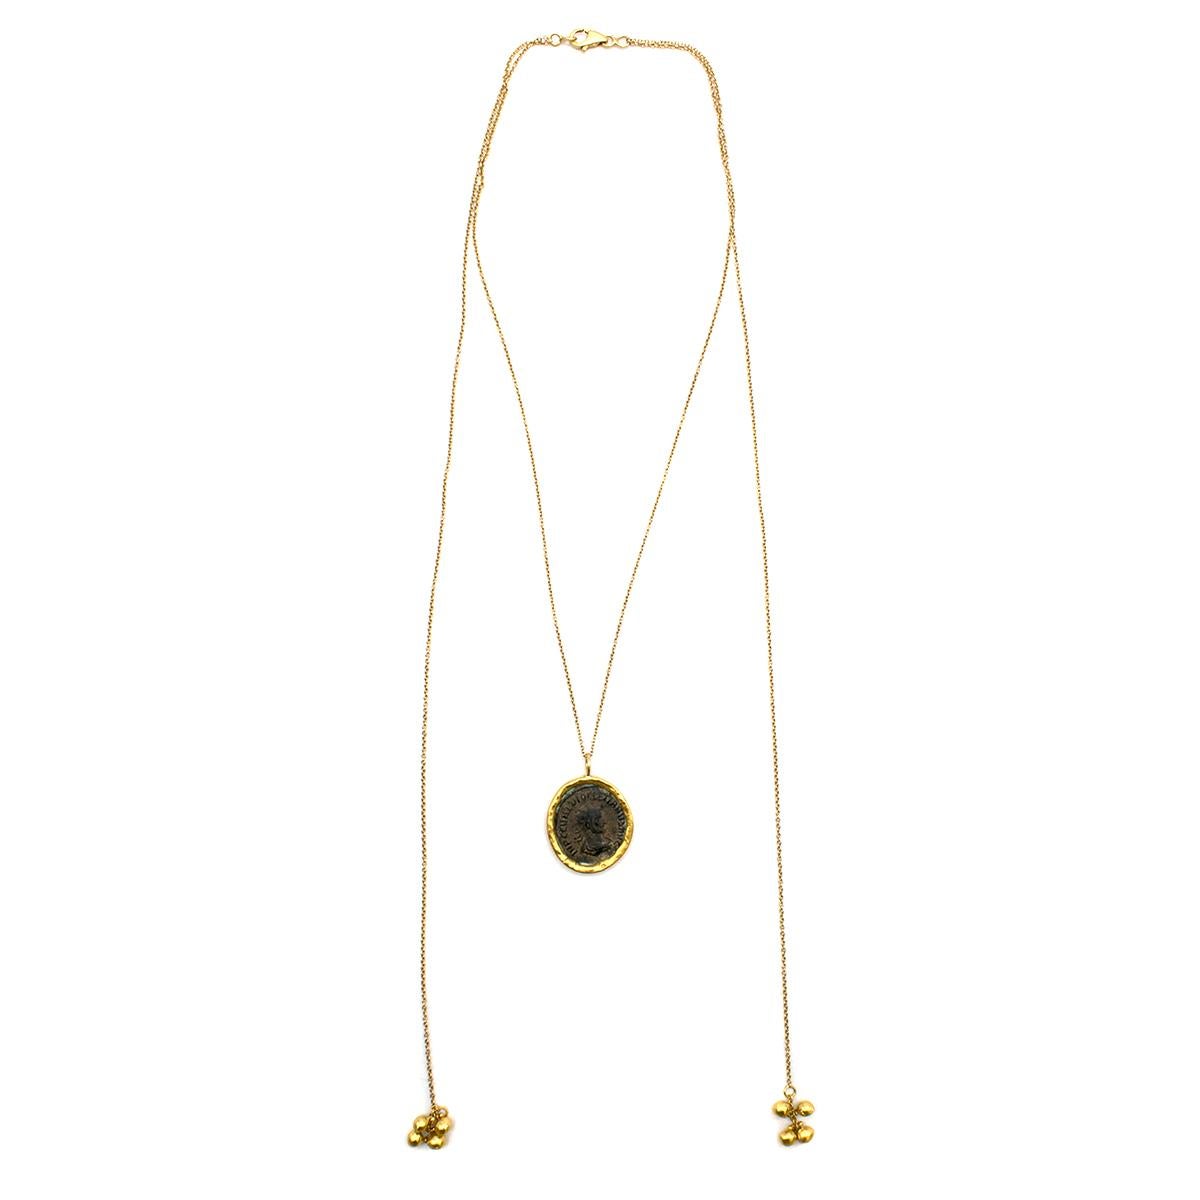 Bespoke Yellow Gold Coin Double Chained Necklace

- Coin Pendant Necklace 
- Bronze toned coin lined in yellow gold 
- Two decorative chains on sides for doubled effect 
- 18k Yellow Gold 
- Weight: 13.25g


Please note, these items are pre-owned